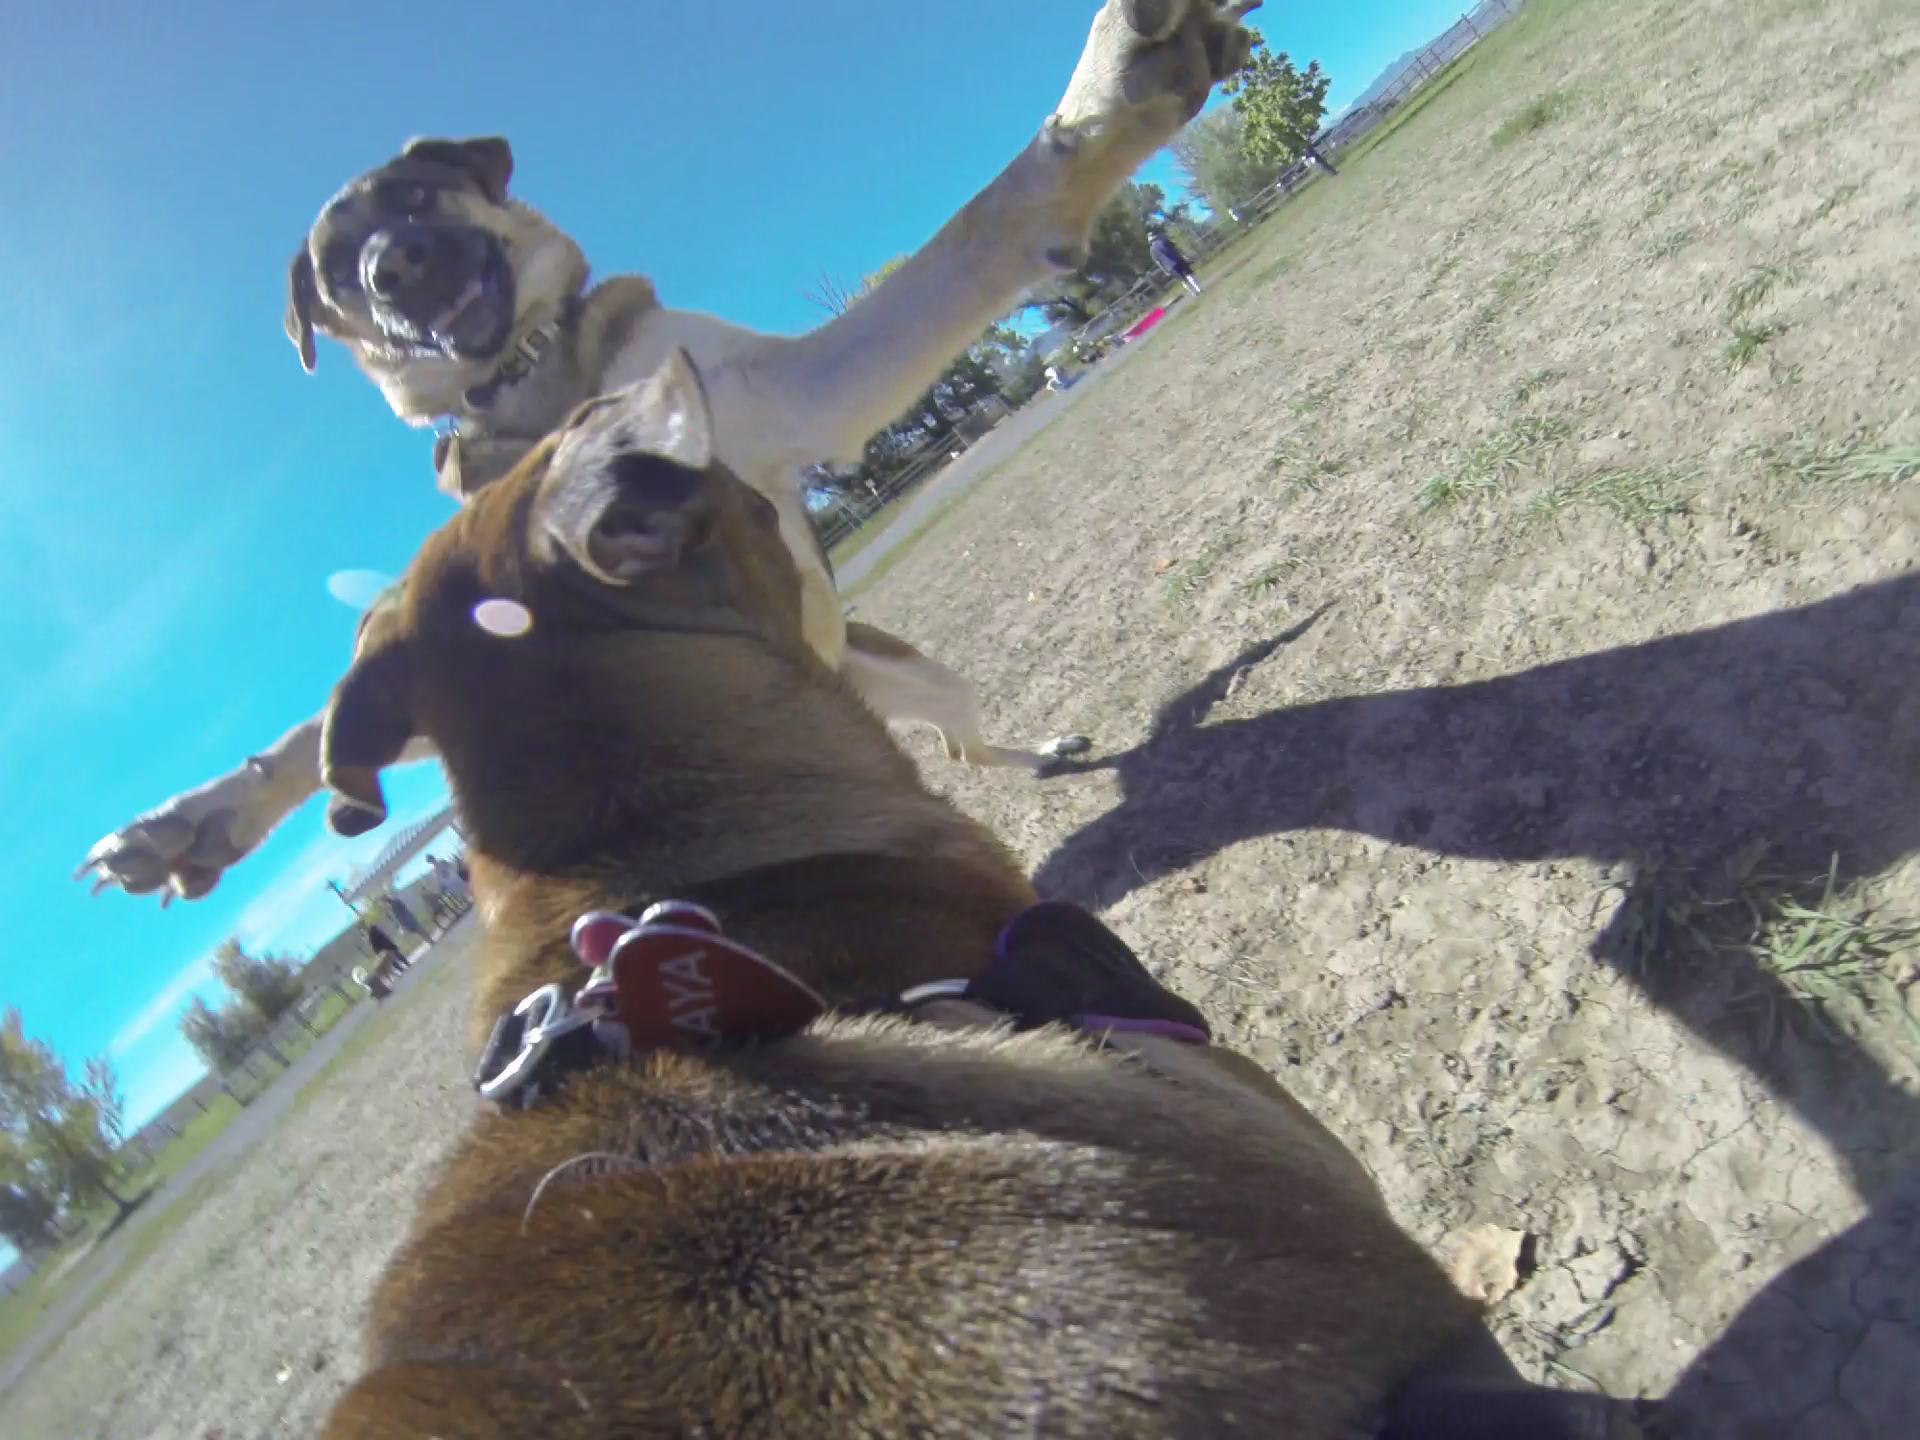 Took my friends dog to a dog park and mounted my GoPro on her back ...